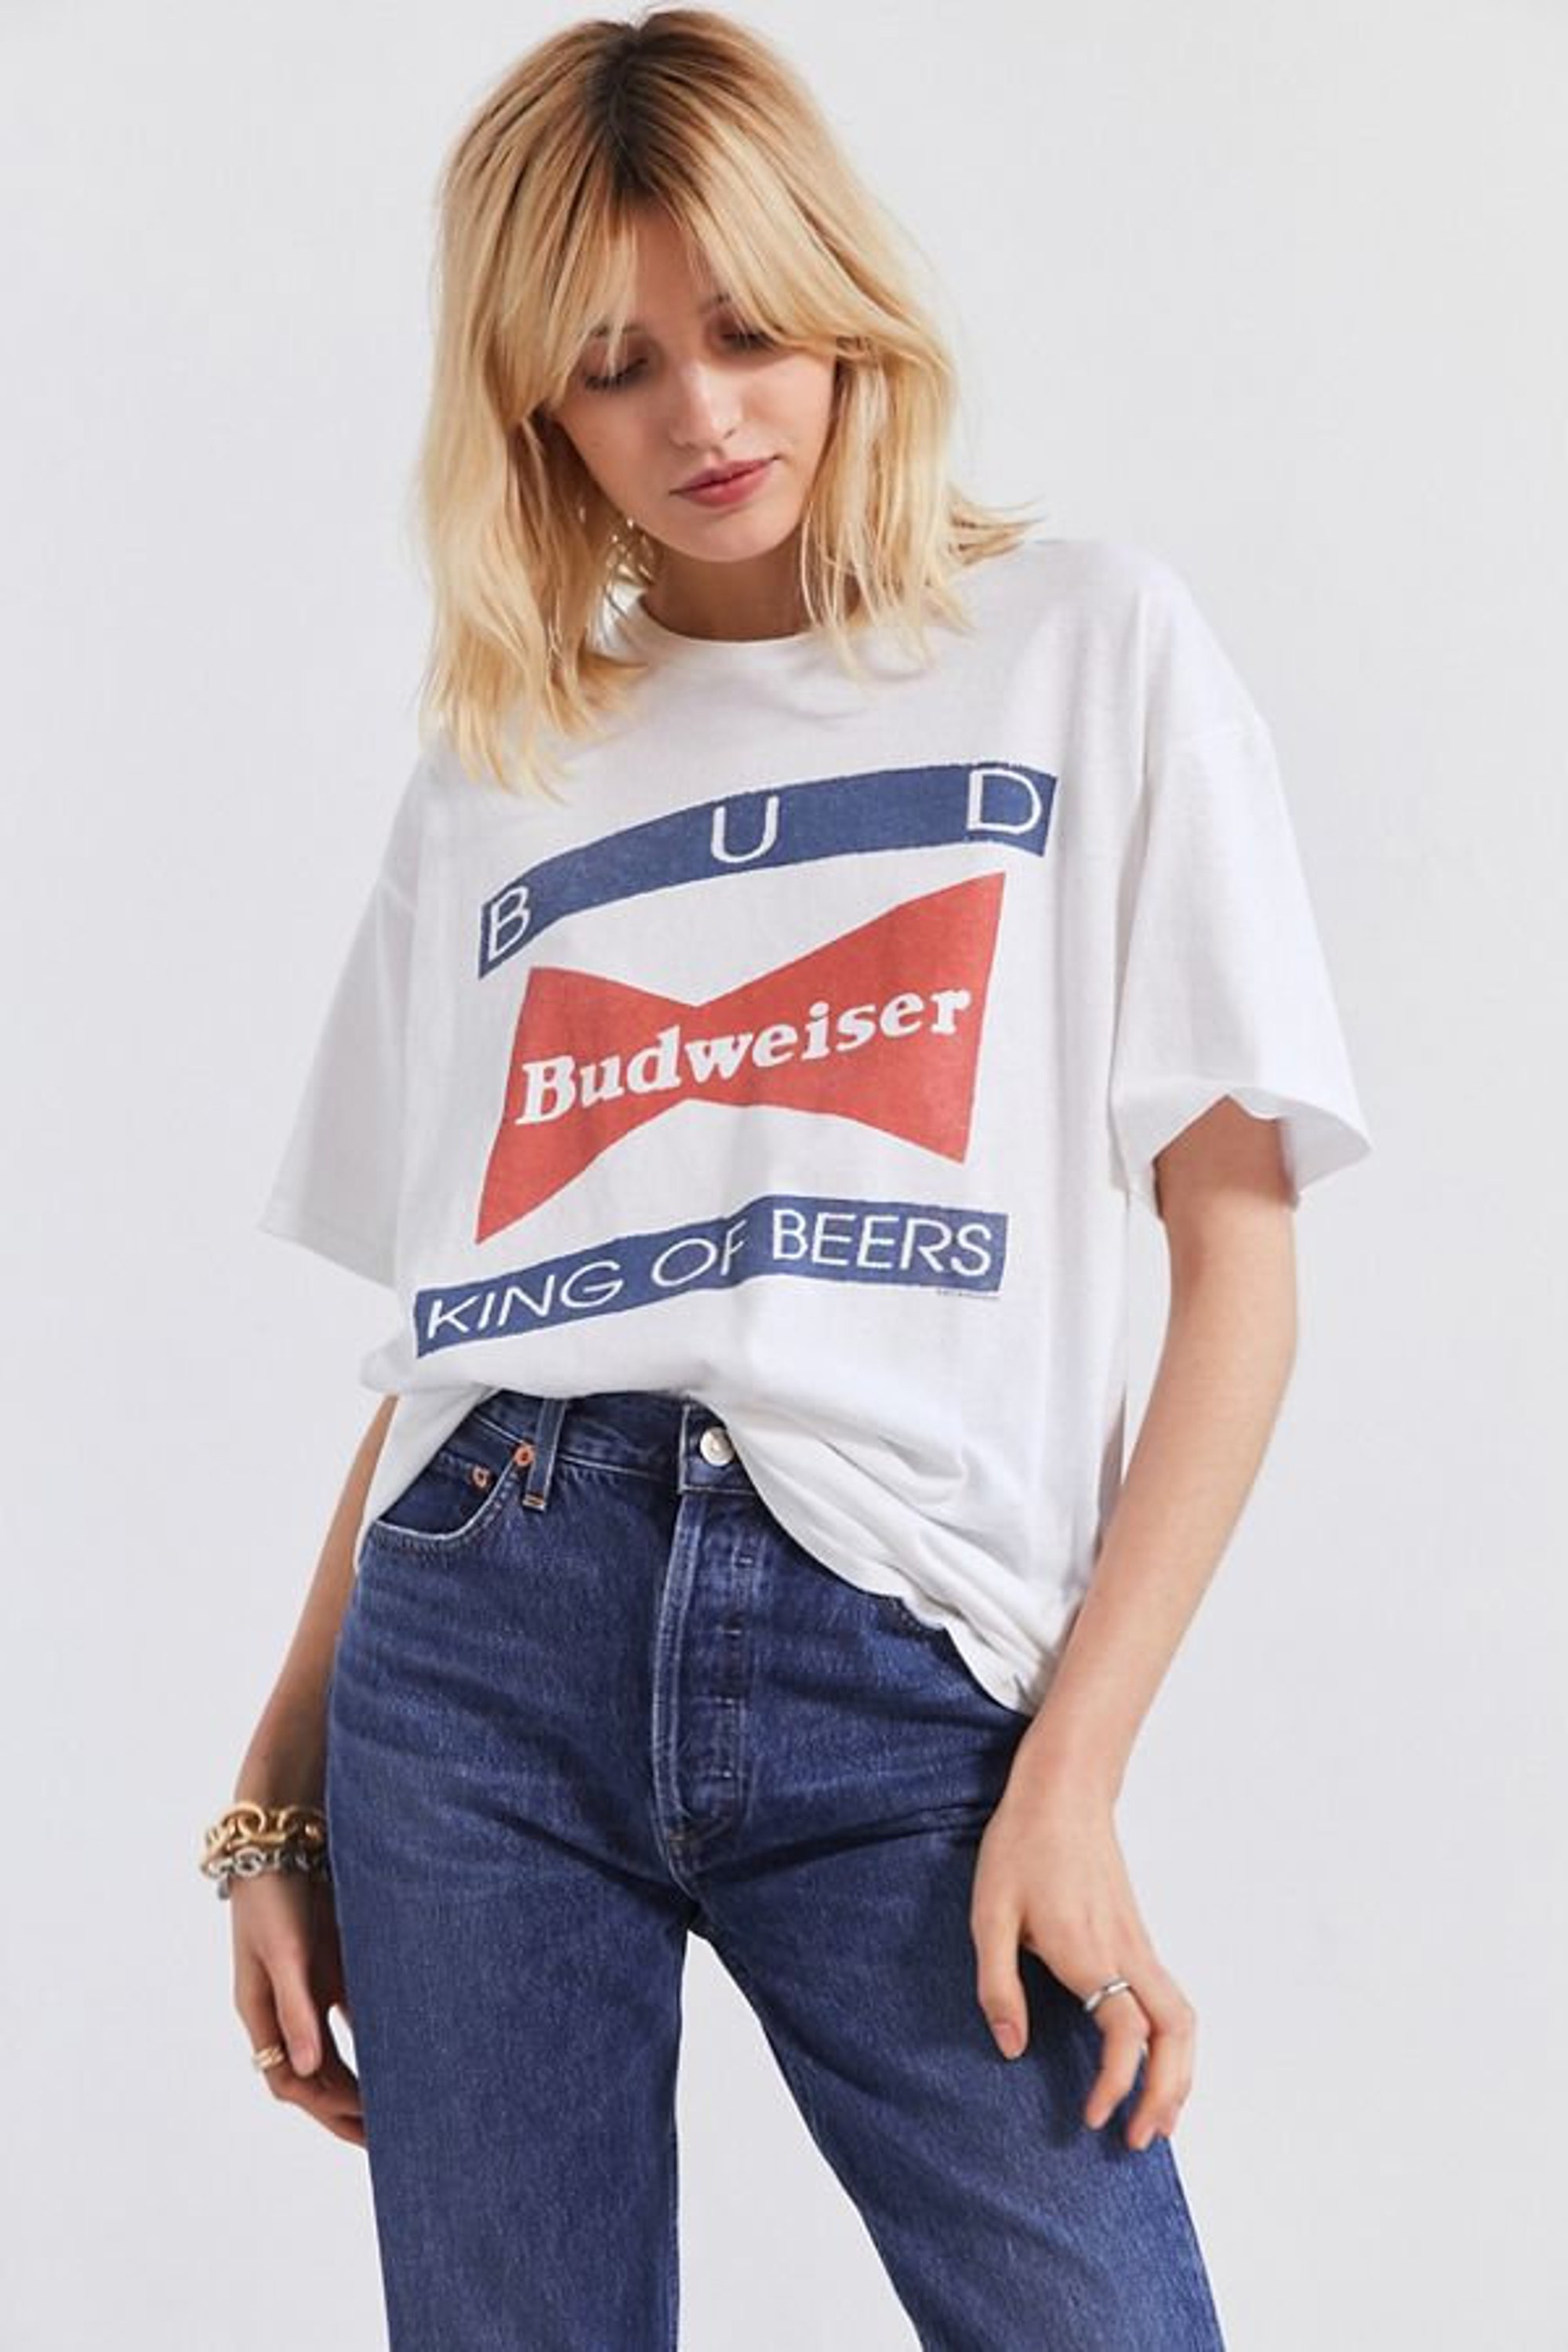 Discover Budweiser King of Beers T Shirt